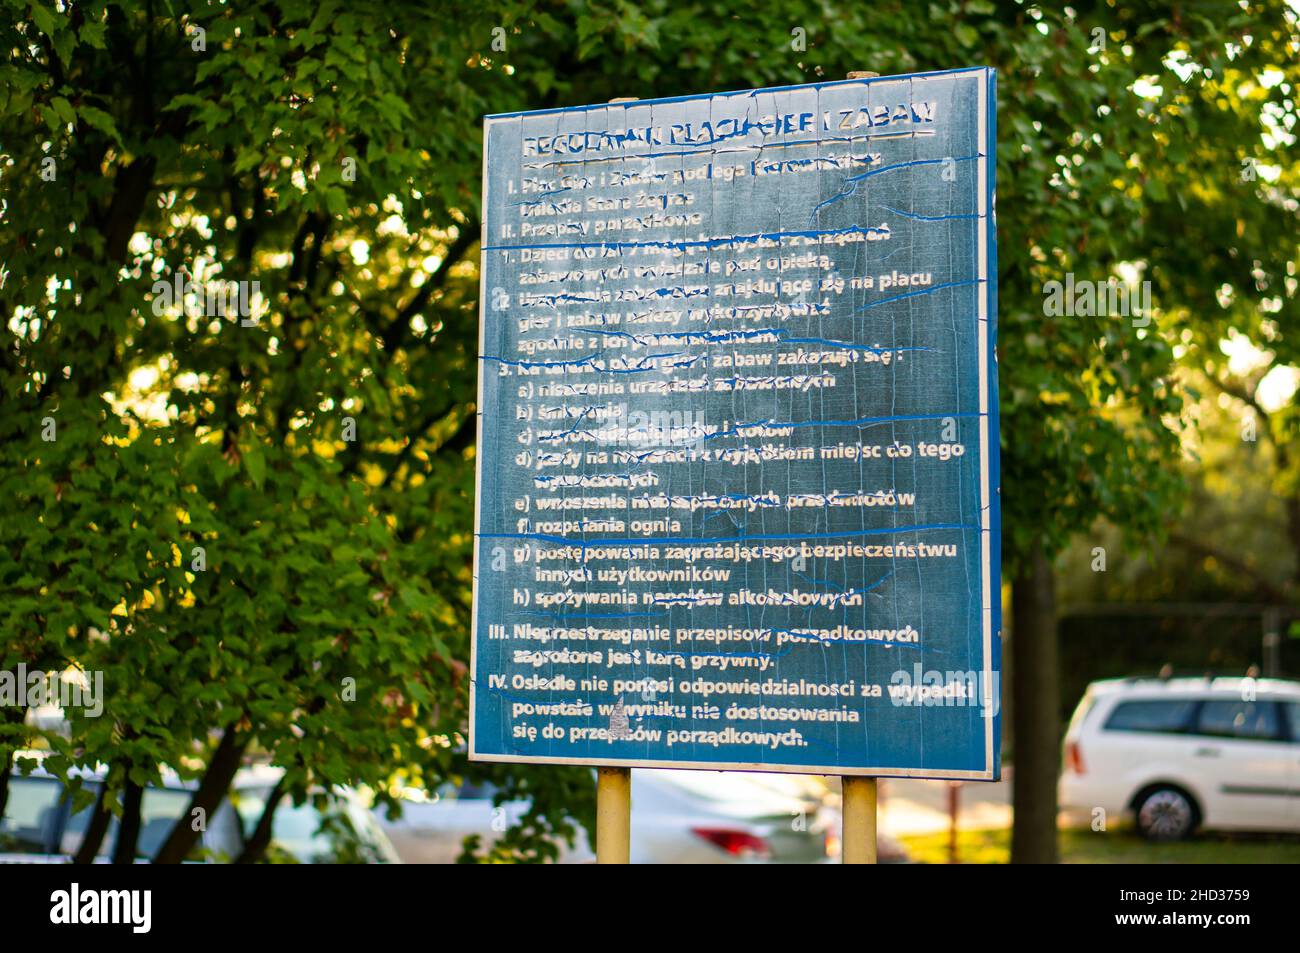 Board containing rules and information by a playground in Poland Stock Photo